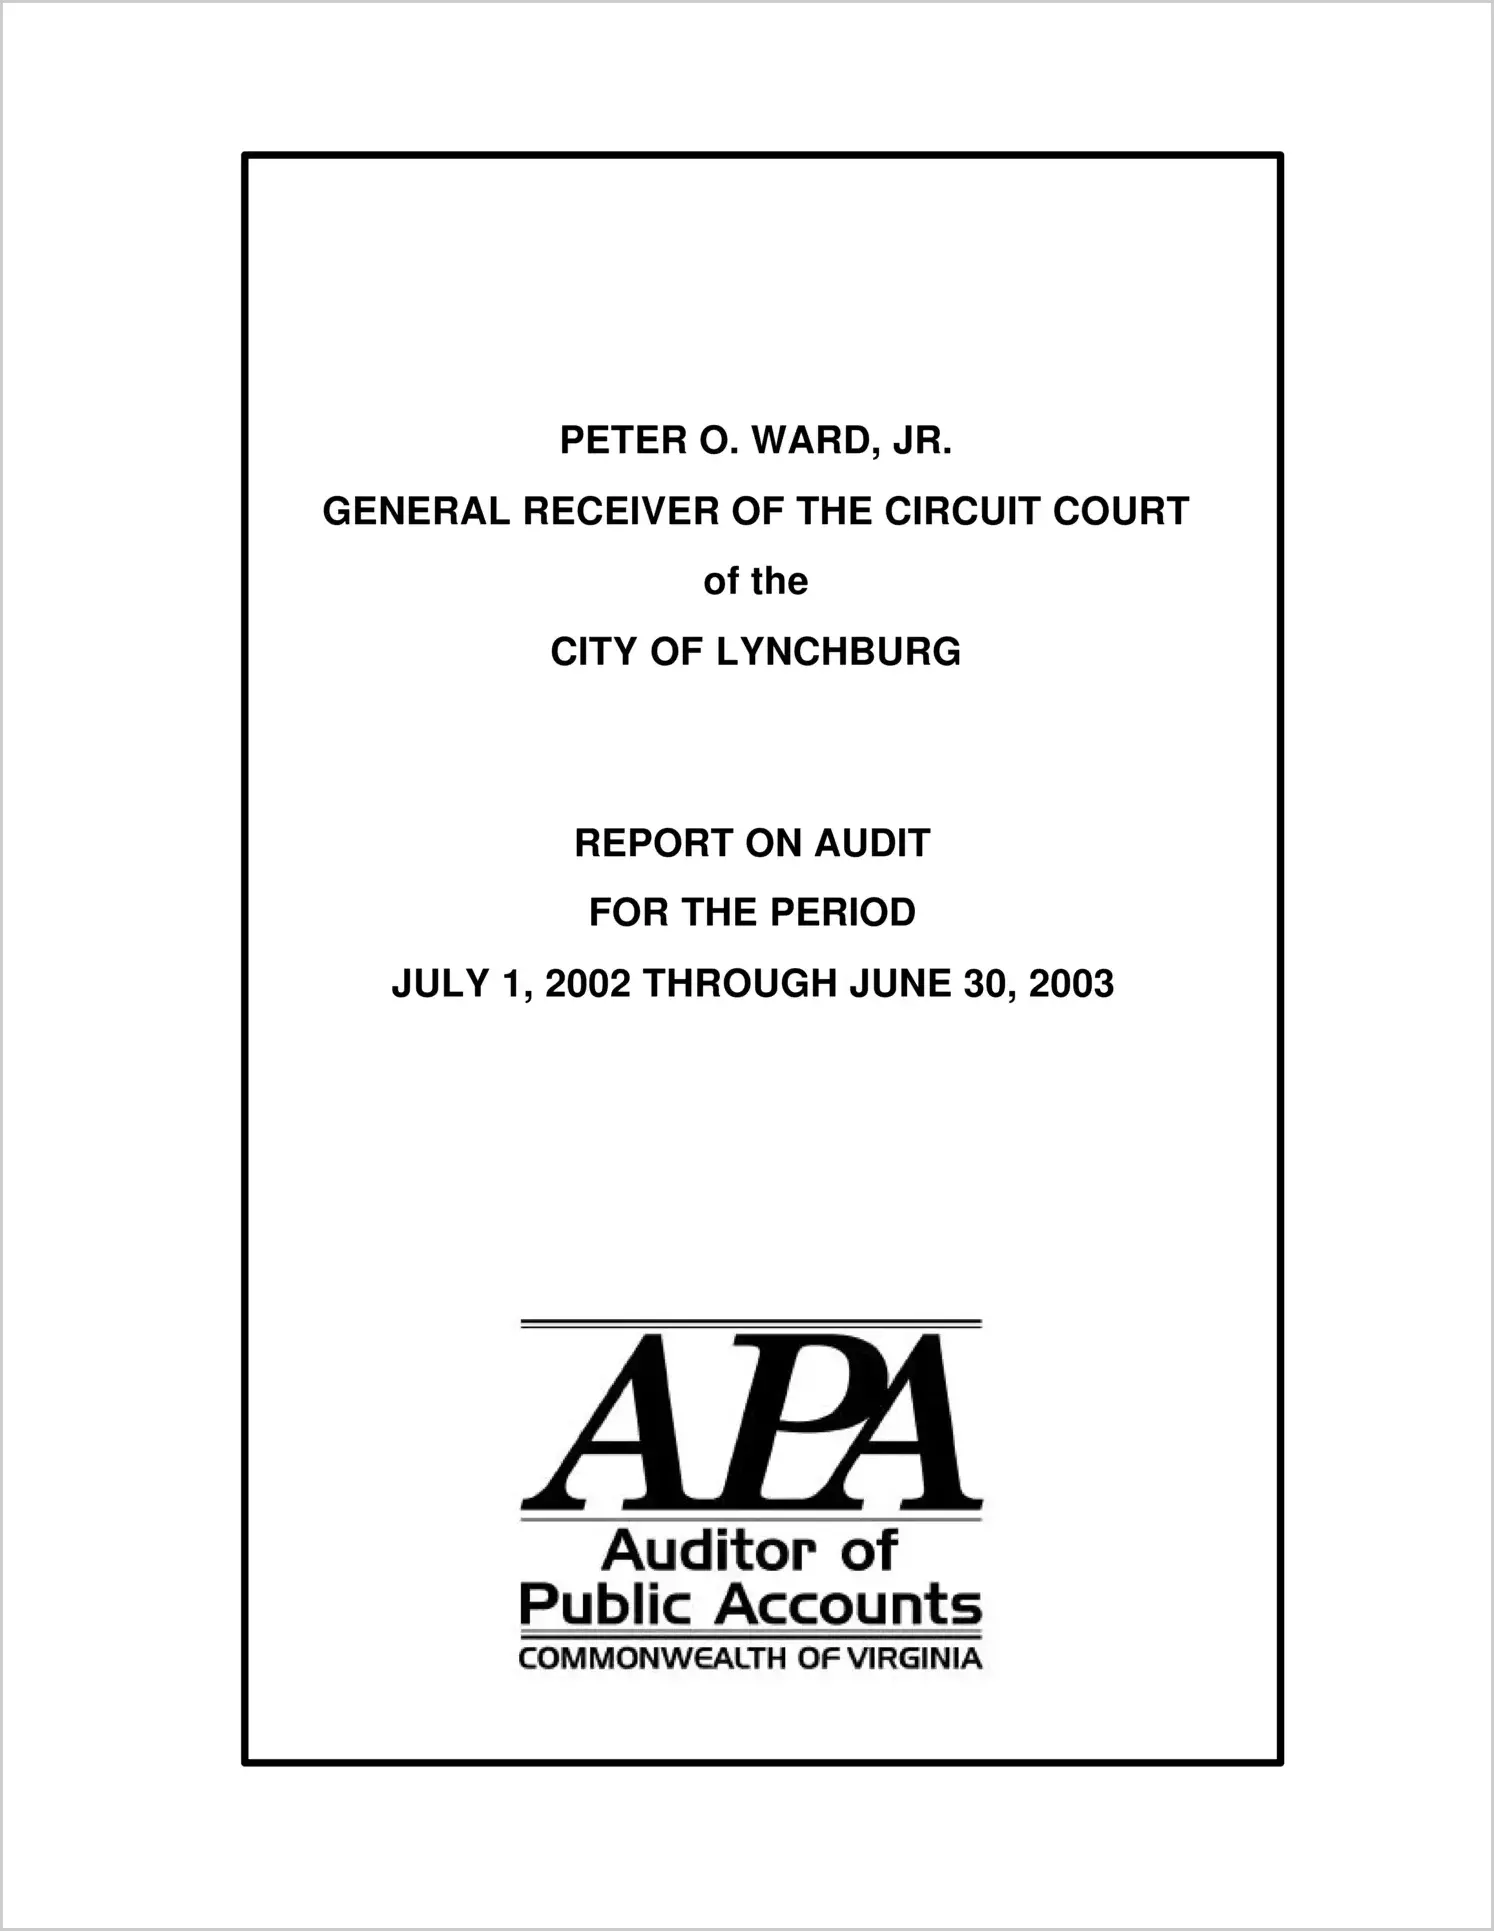 General Receiver of the Circuit Court for the City of Lynchburg for the period July 1, 2002 through June 30, 2003